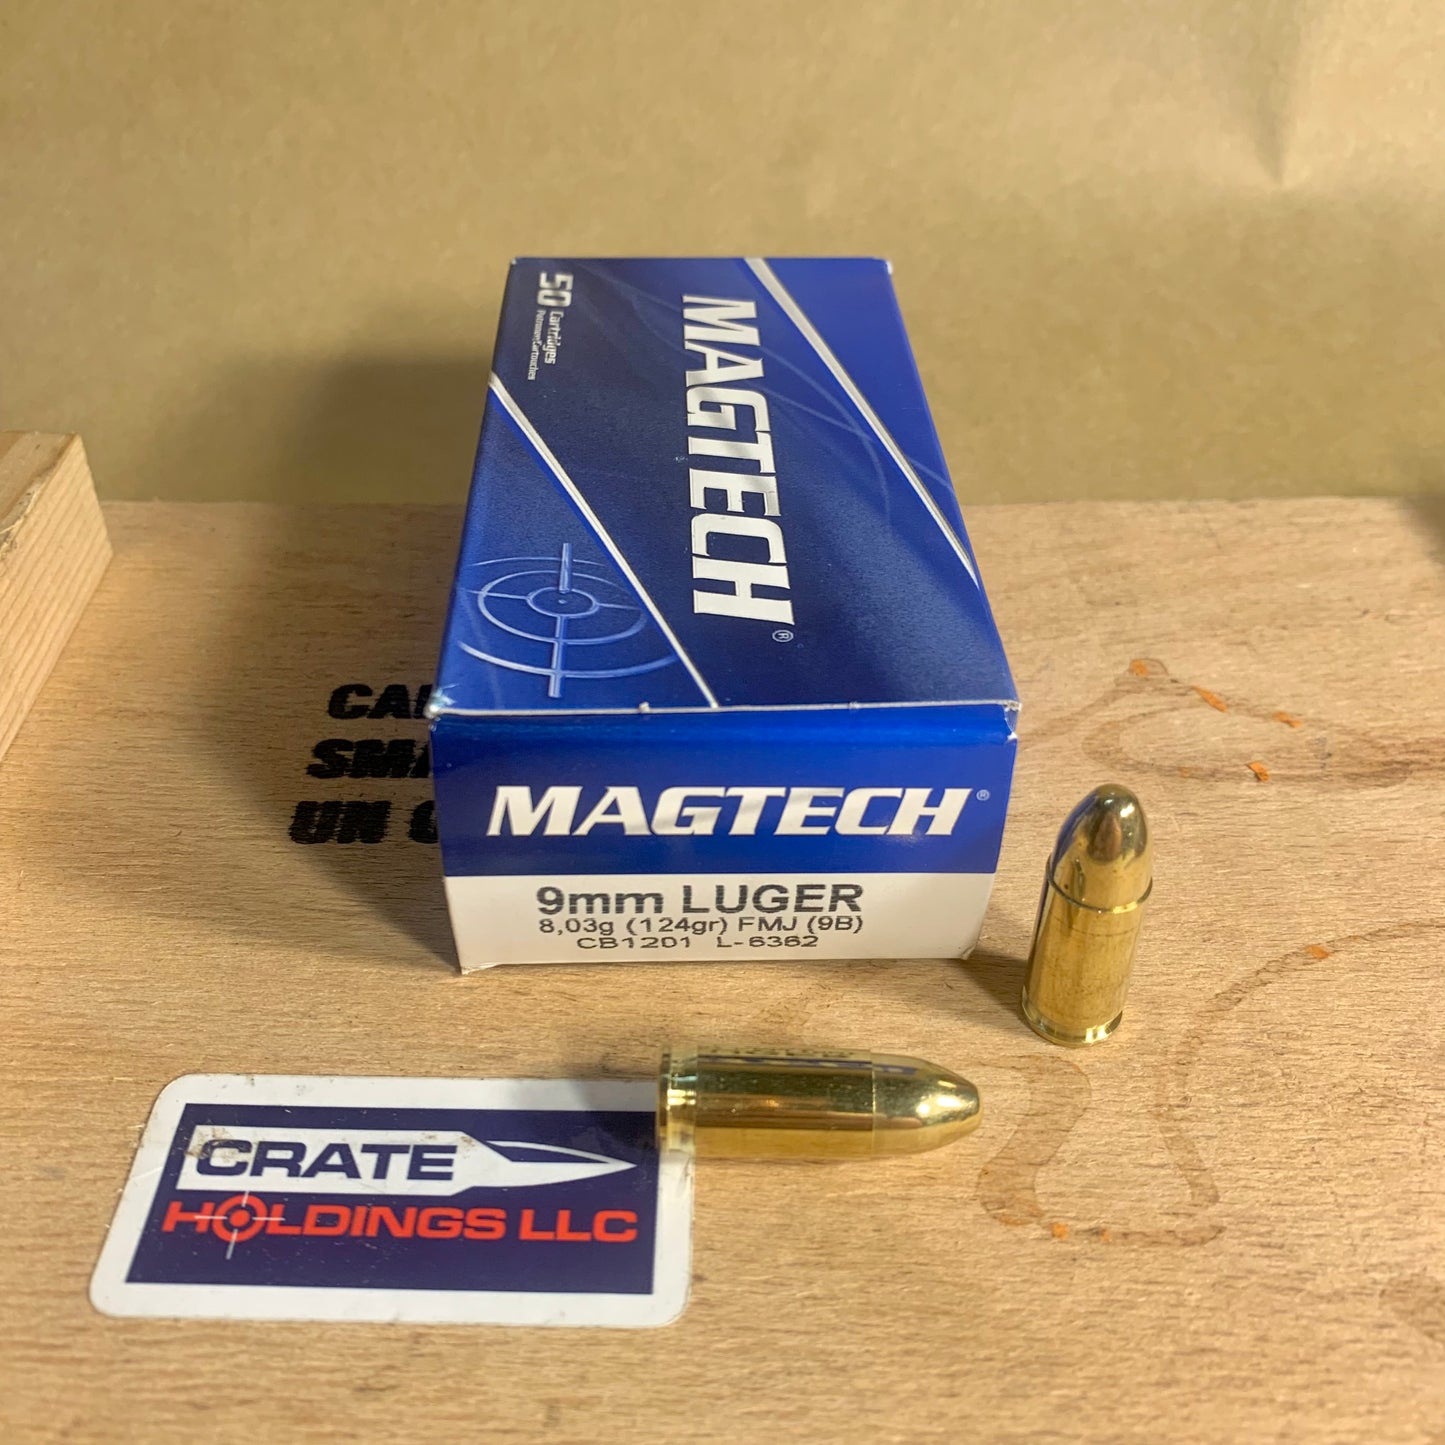 Free Shipping - 1000 Round Case Magtech 9mm Luger Ammo 124gr FMJ - 9B